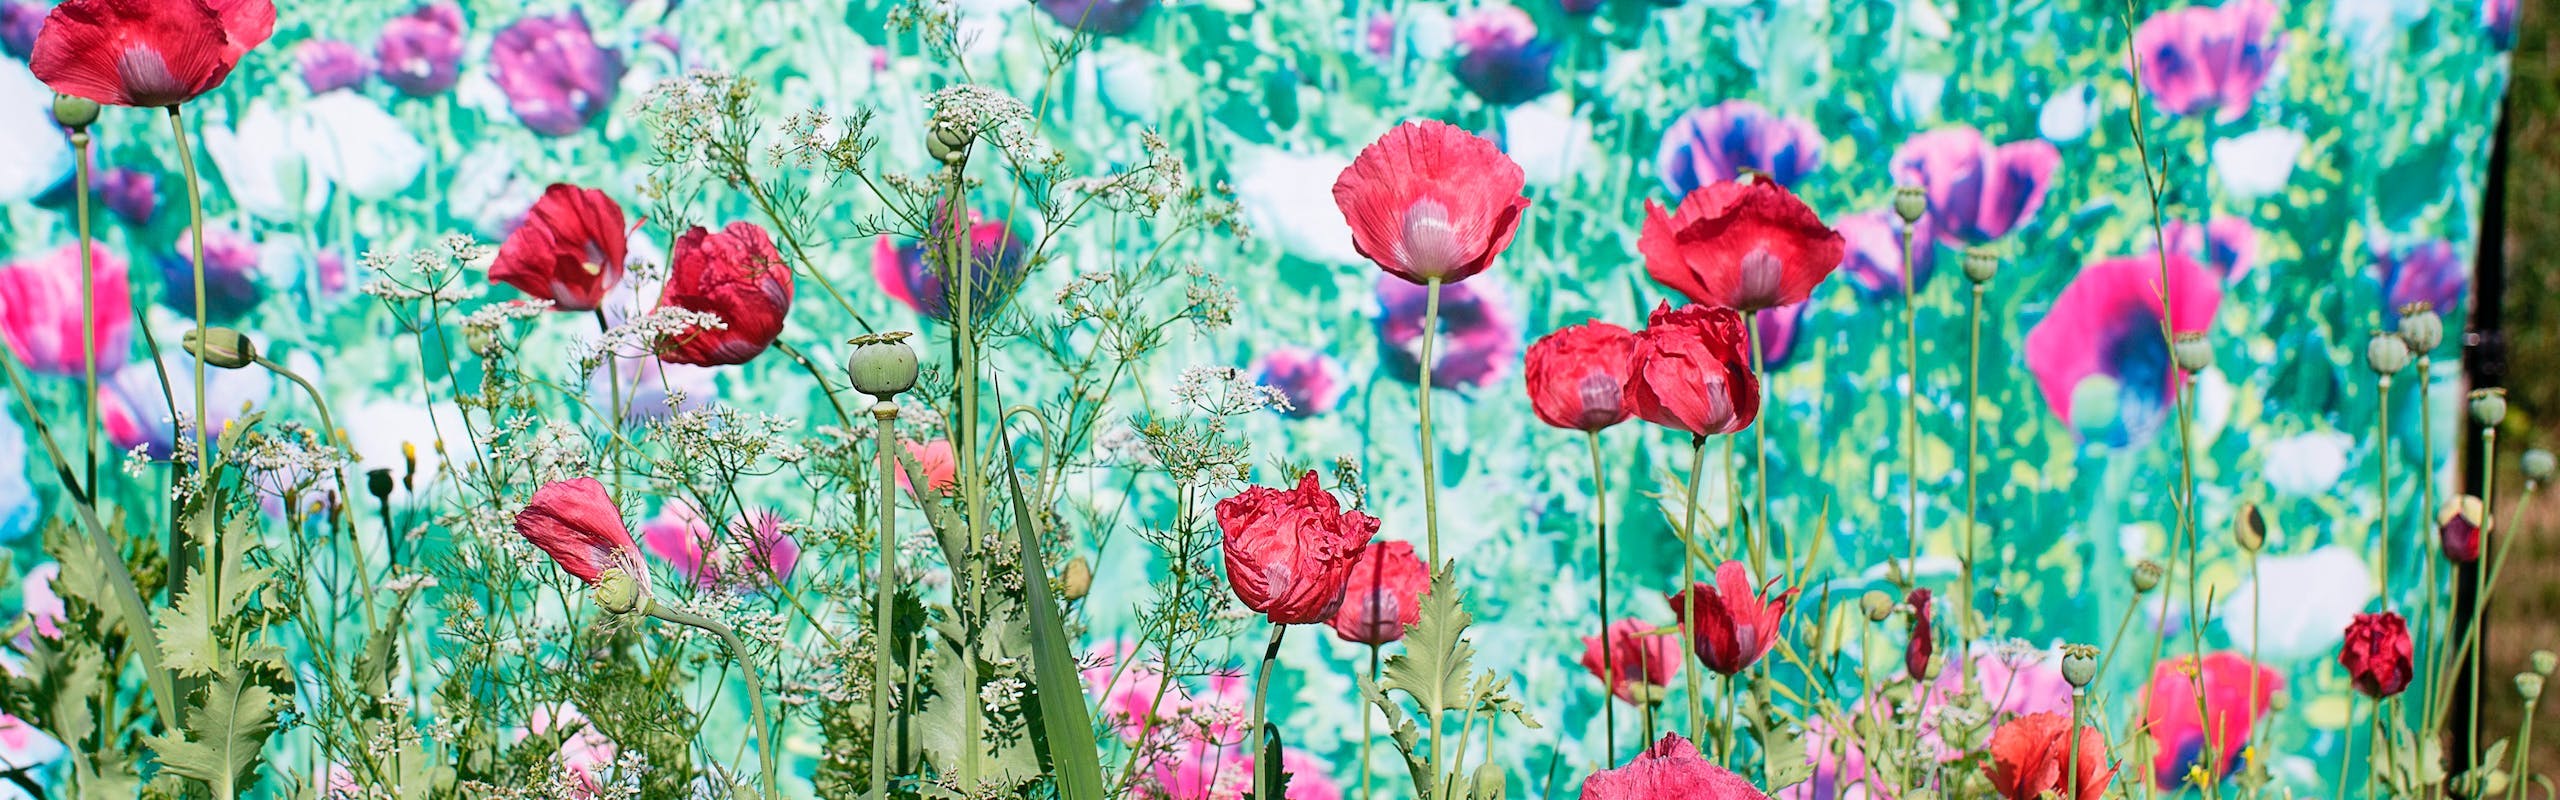 Pao Houa Her, untitled (real opium, behind opium backdrop), 2020, lightbox, 132 x 165 cm (52 x 65 in), © Pao Houa Her, Courtesy Bockley Gallery.  